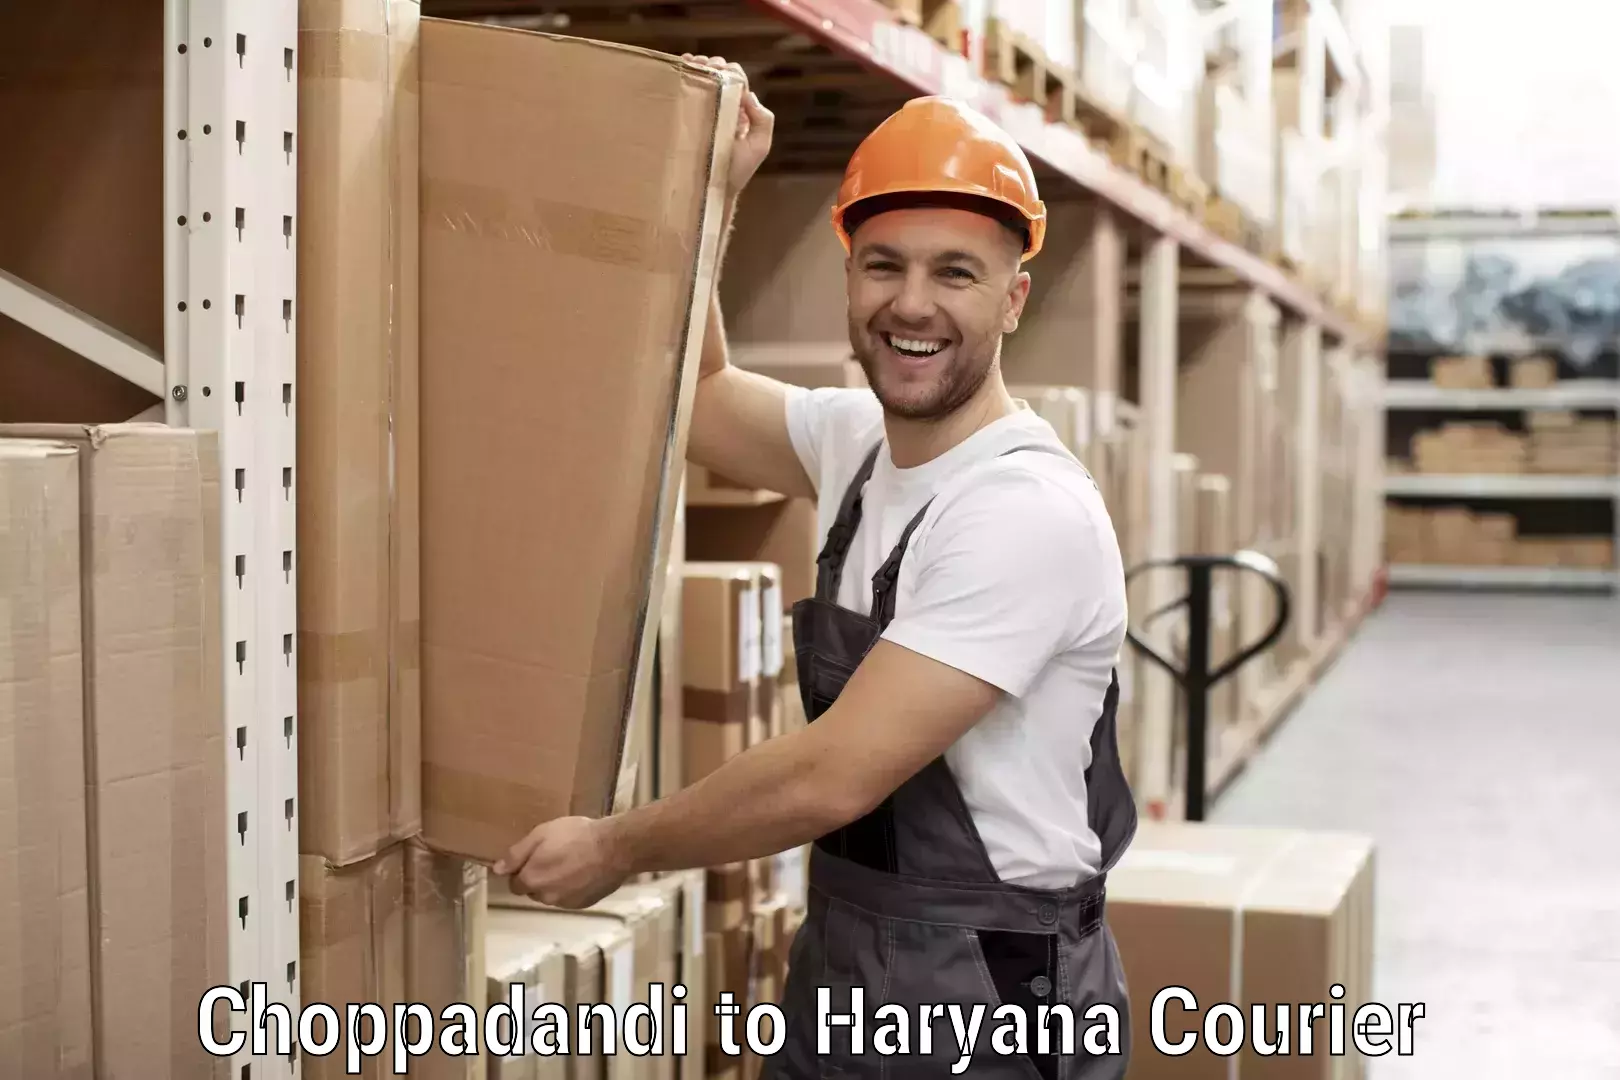 Specialized courier services Choppadandi to Chaudhary Charan Singh Haryana Agricultural University Hisar